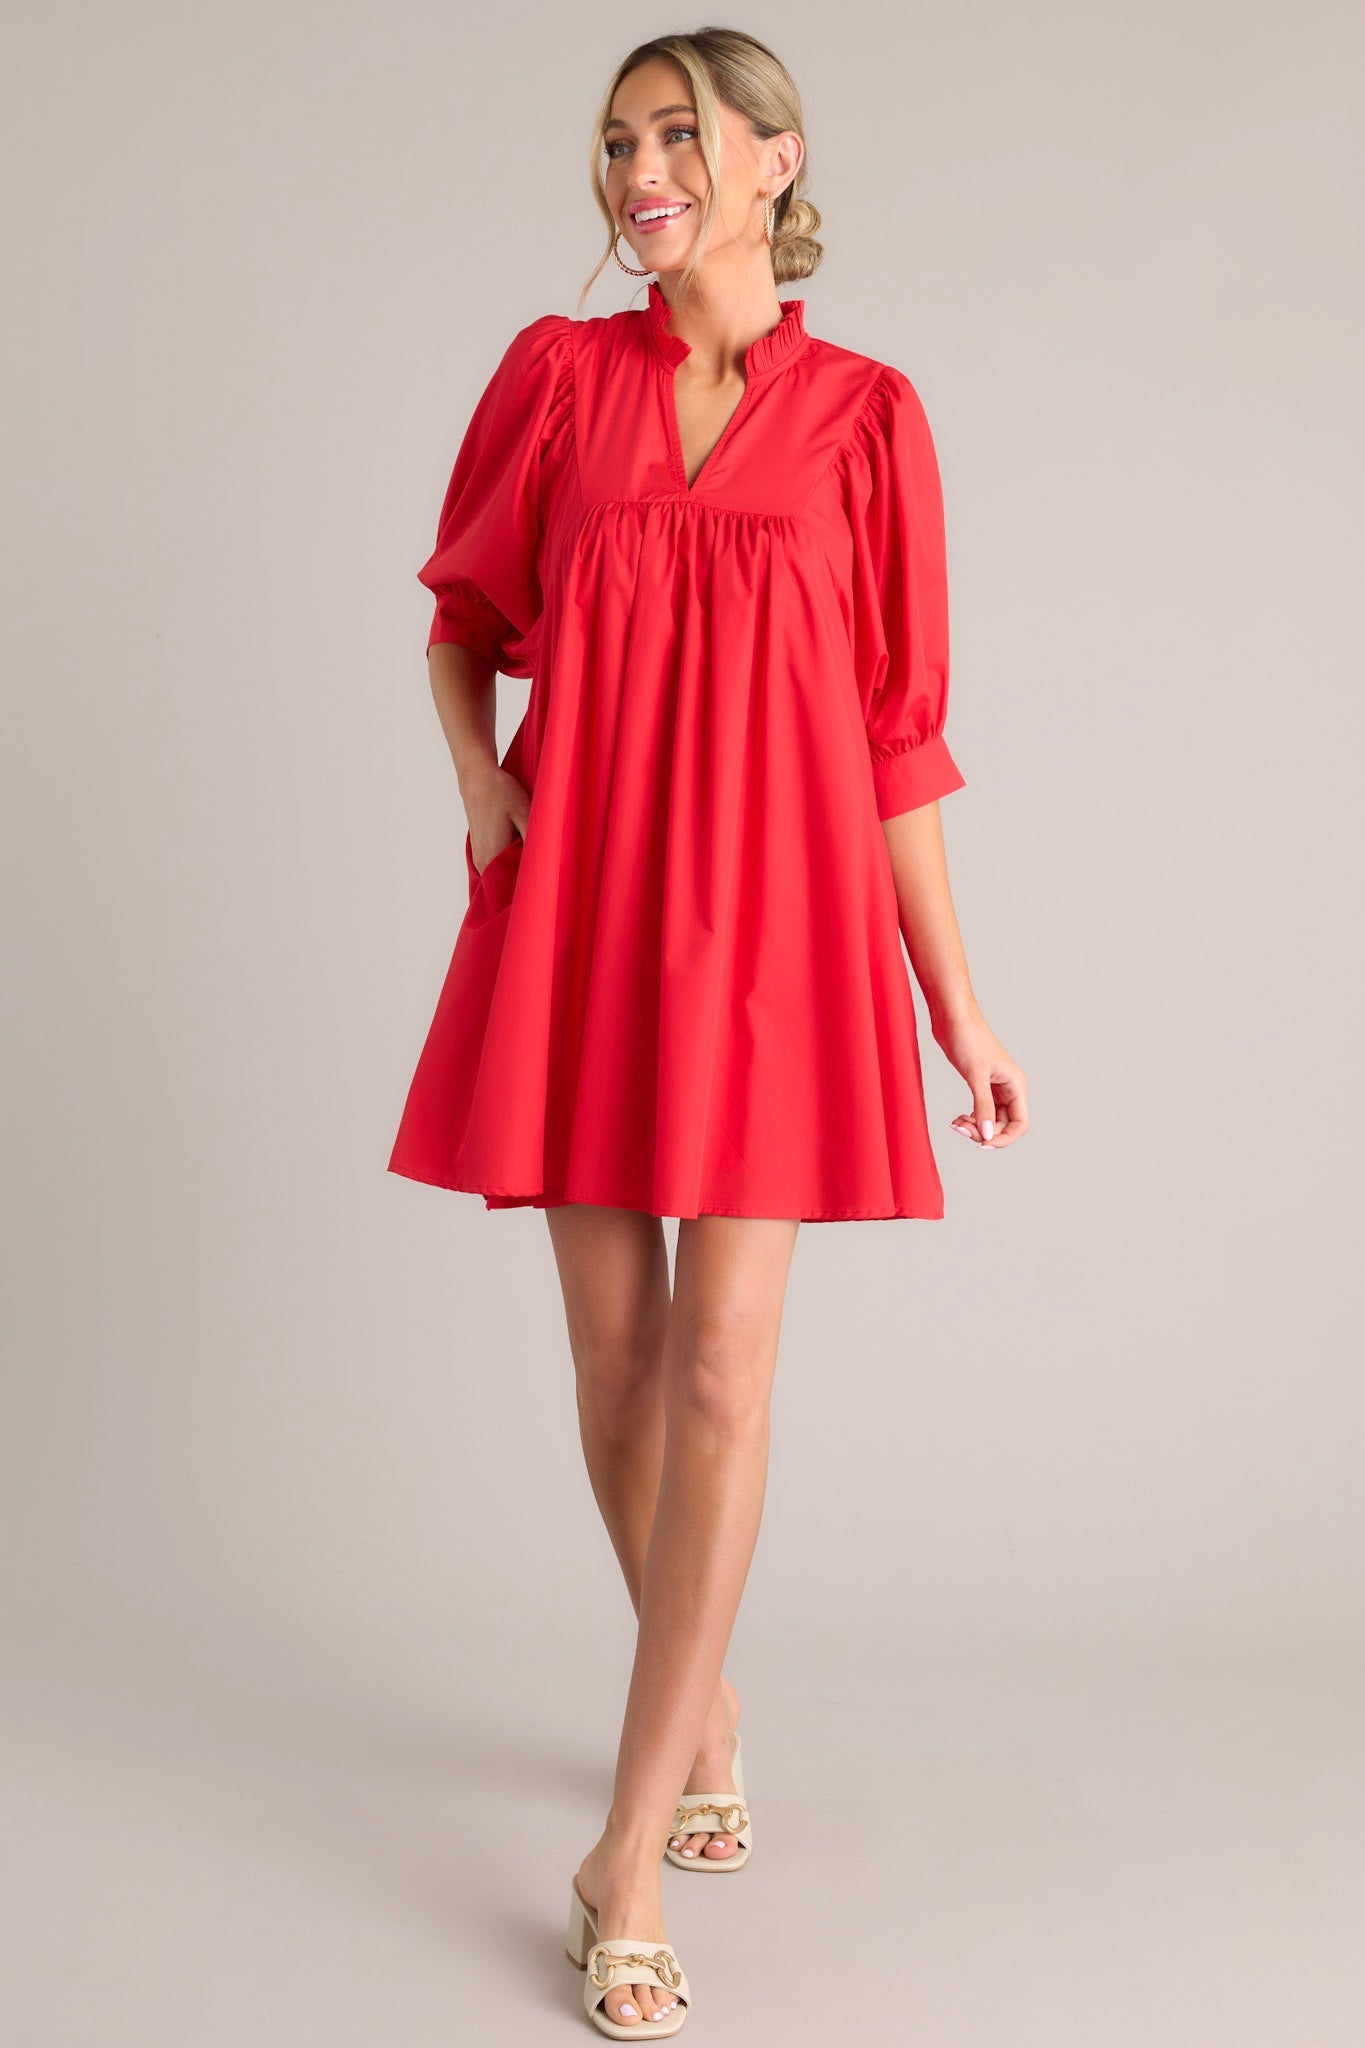 Full body view of this red mini dress that features a v-neckline, a ruffled faux collar, pleated detailing around the bust, functional hip pockets, and cuffed puff sleeves.